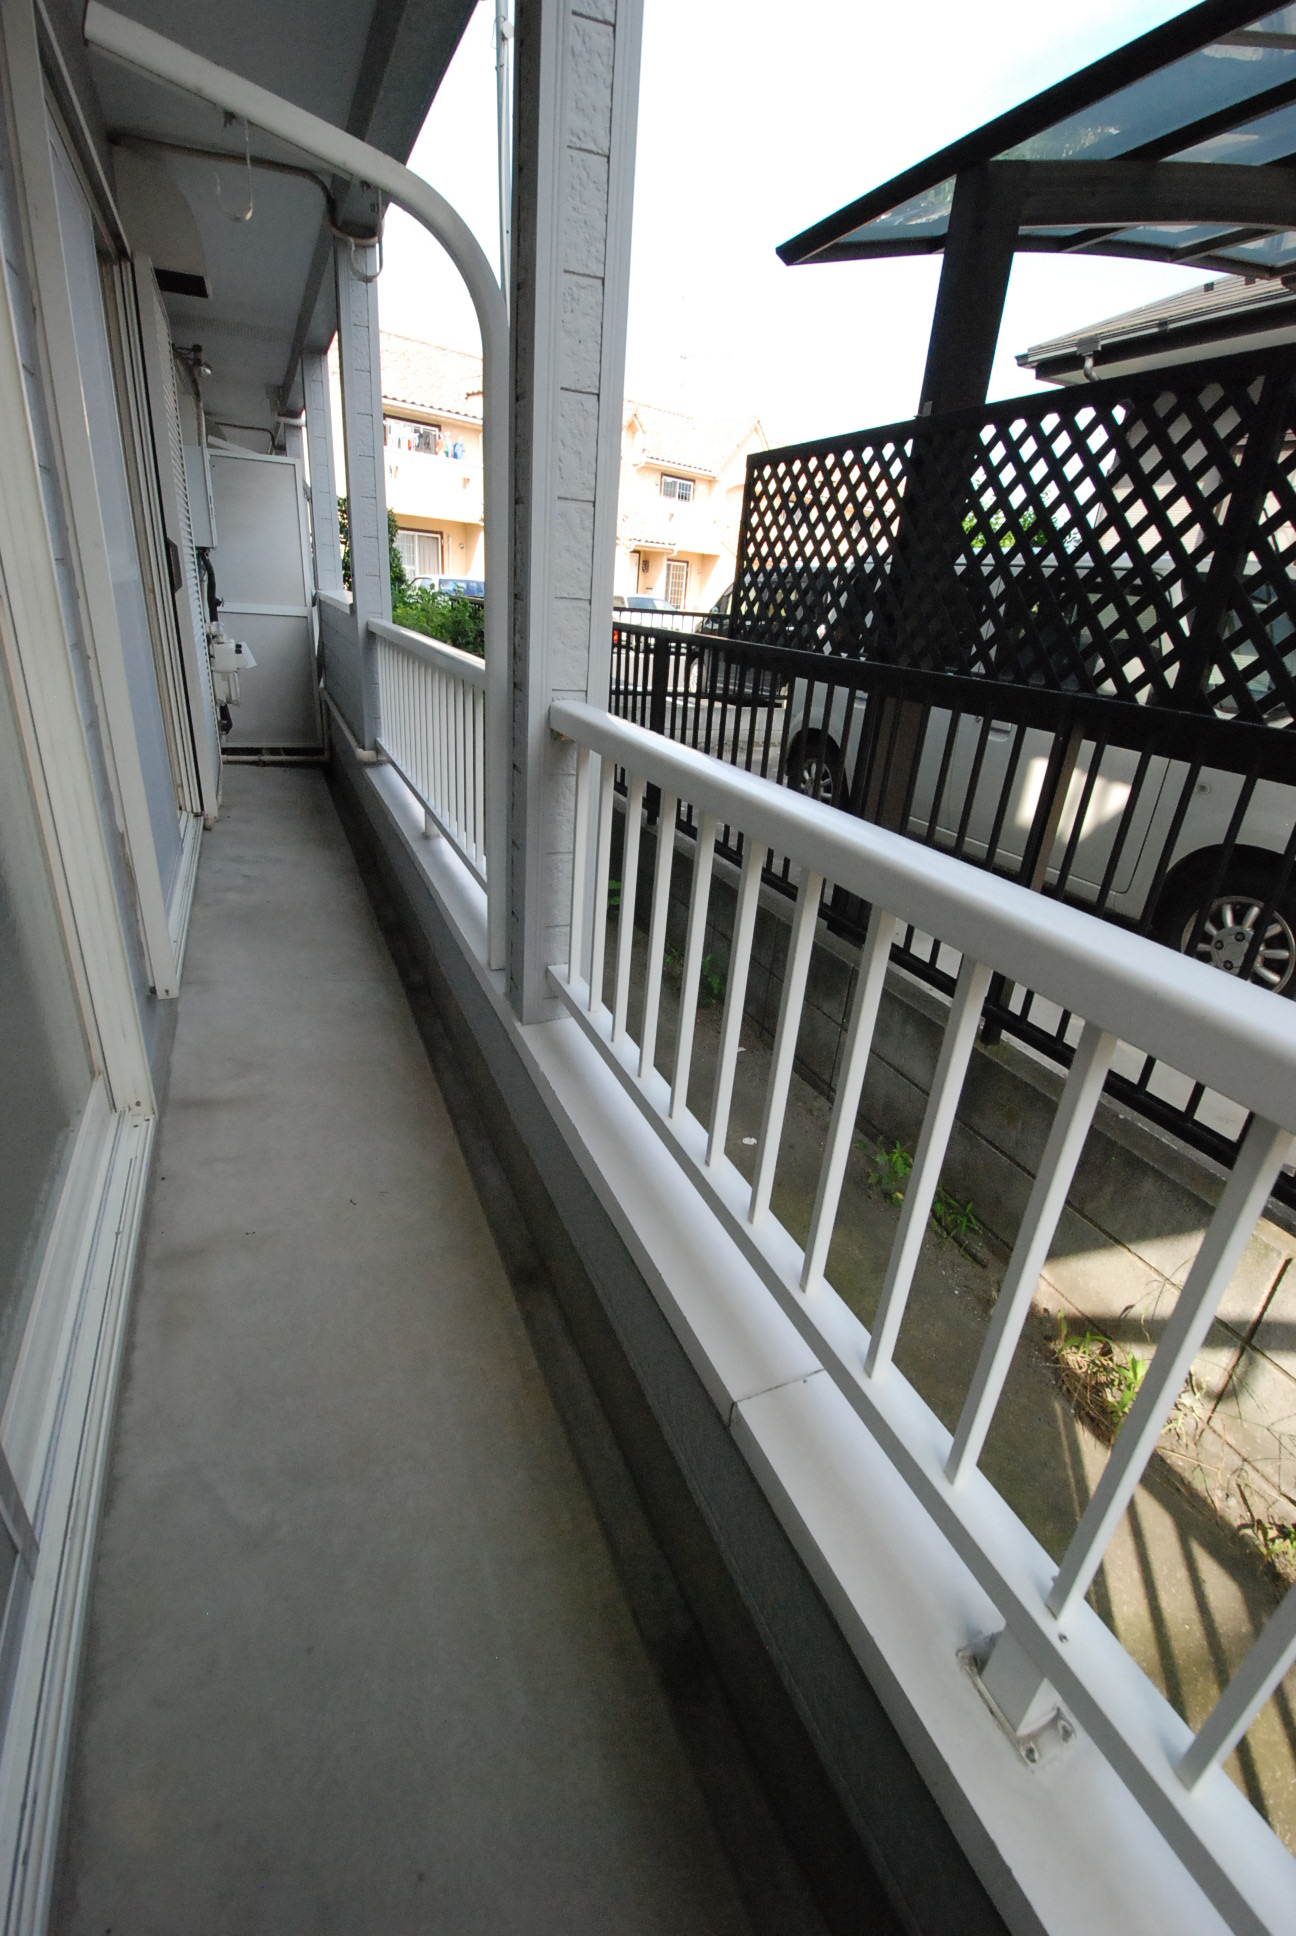 Balcony. Wide ~ There